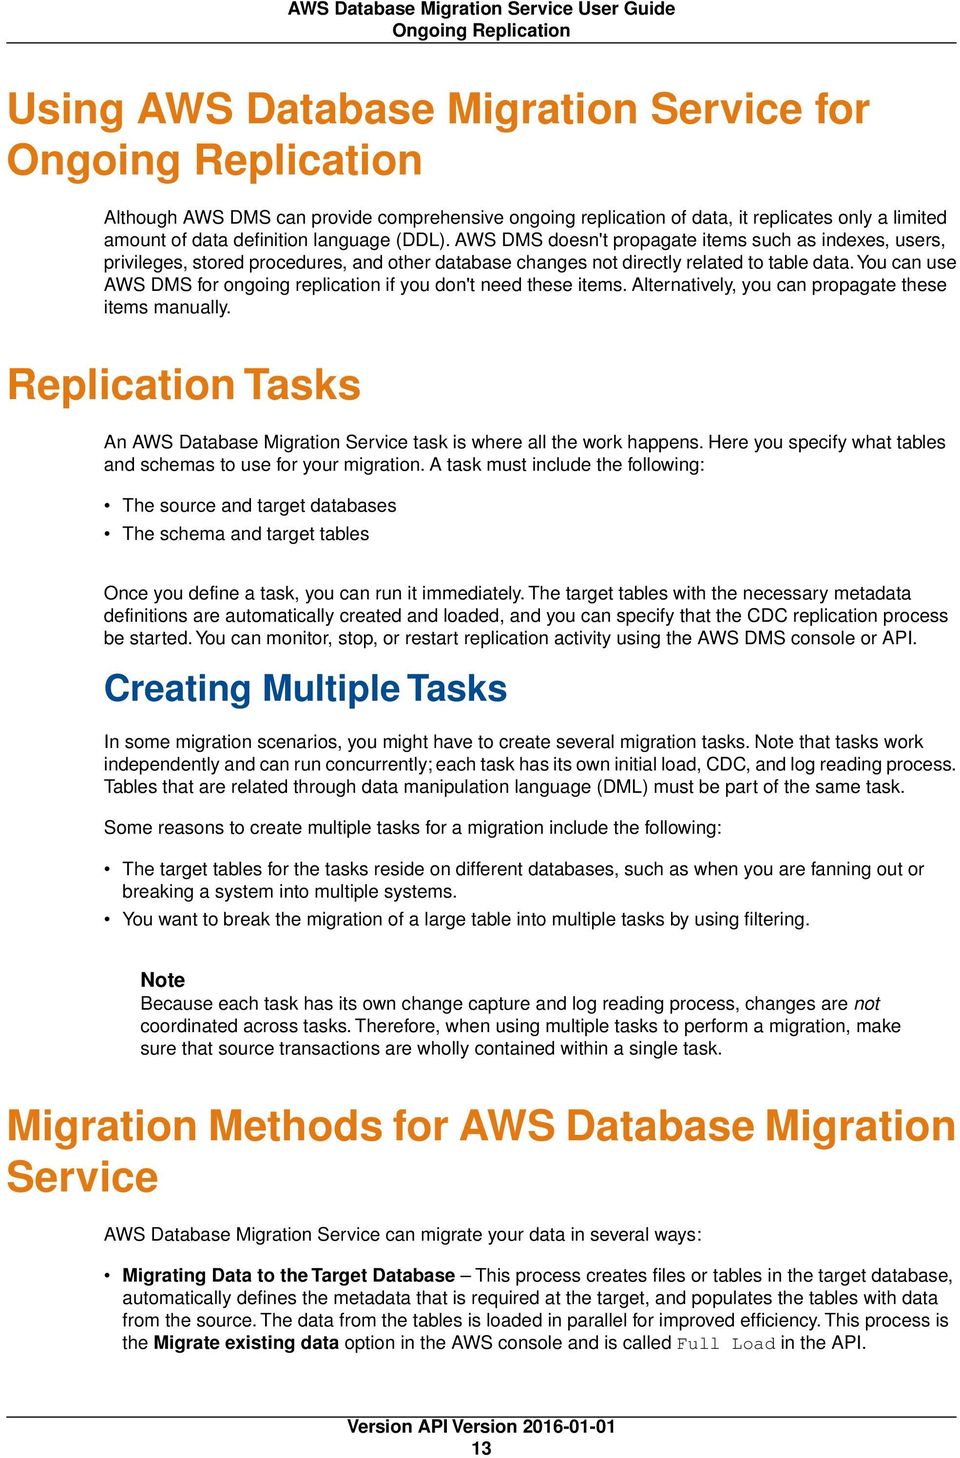 you can use AWS DMS for ongoing replication if you don't need these items. Alternatively, you can propagate these items manually.